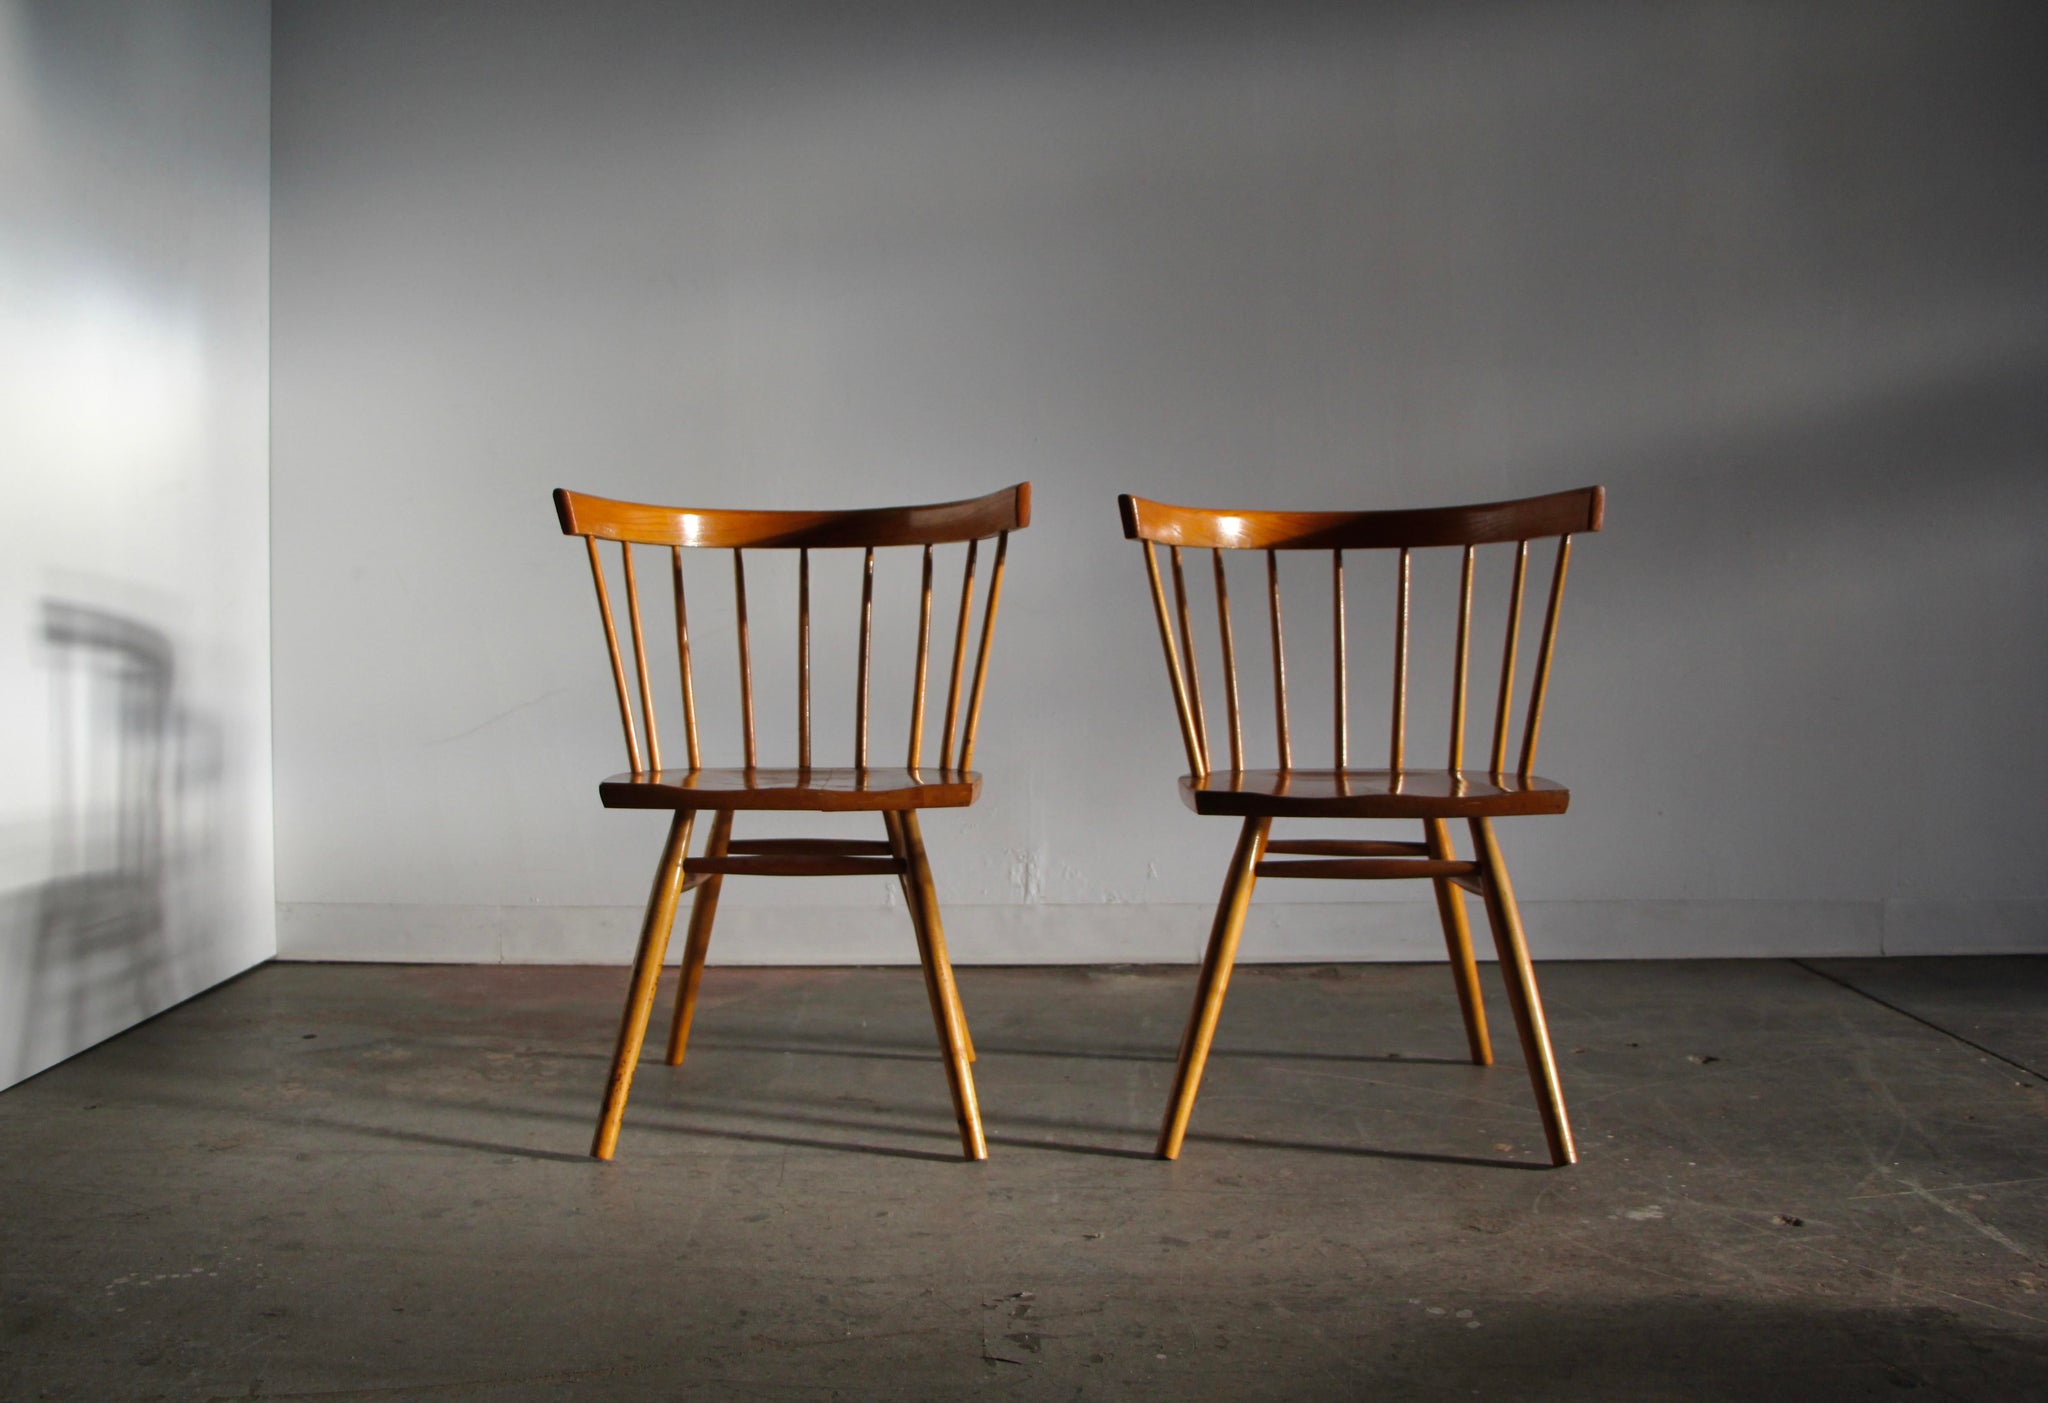 Pair of Straight Backed Antique Chairs